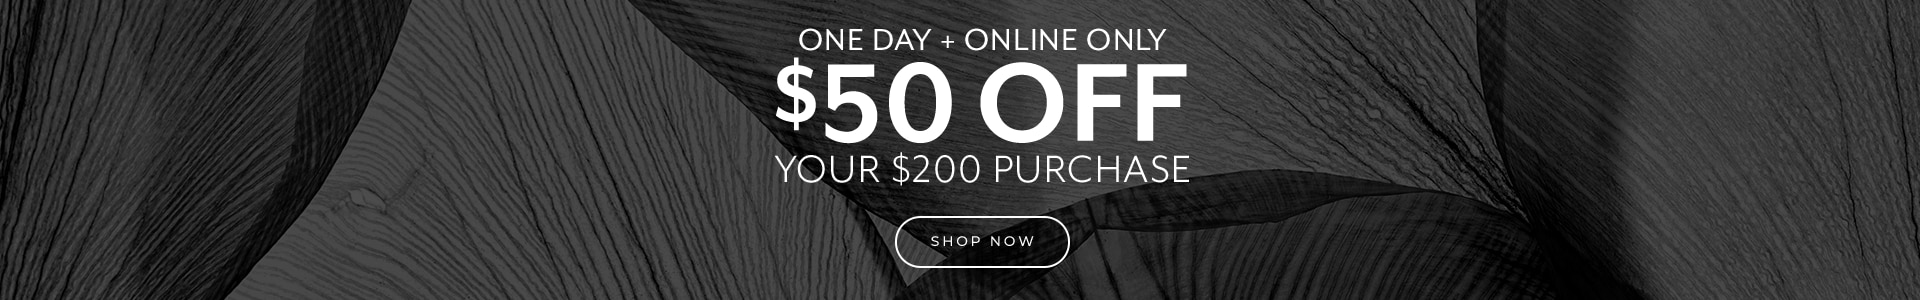 New $50 Off Purchase of $200